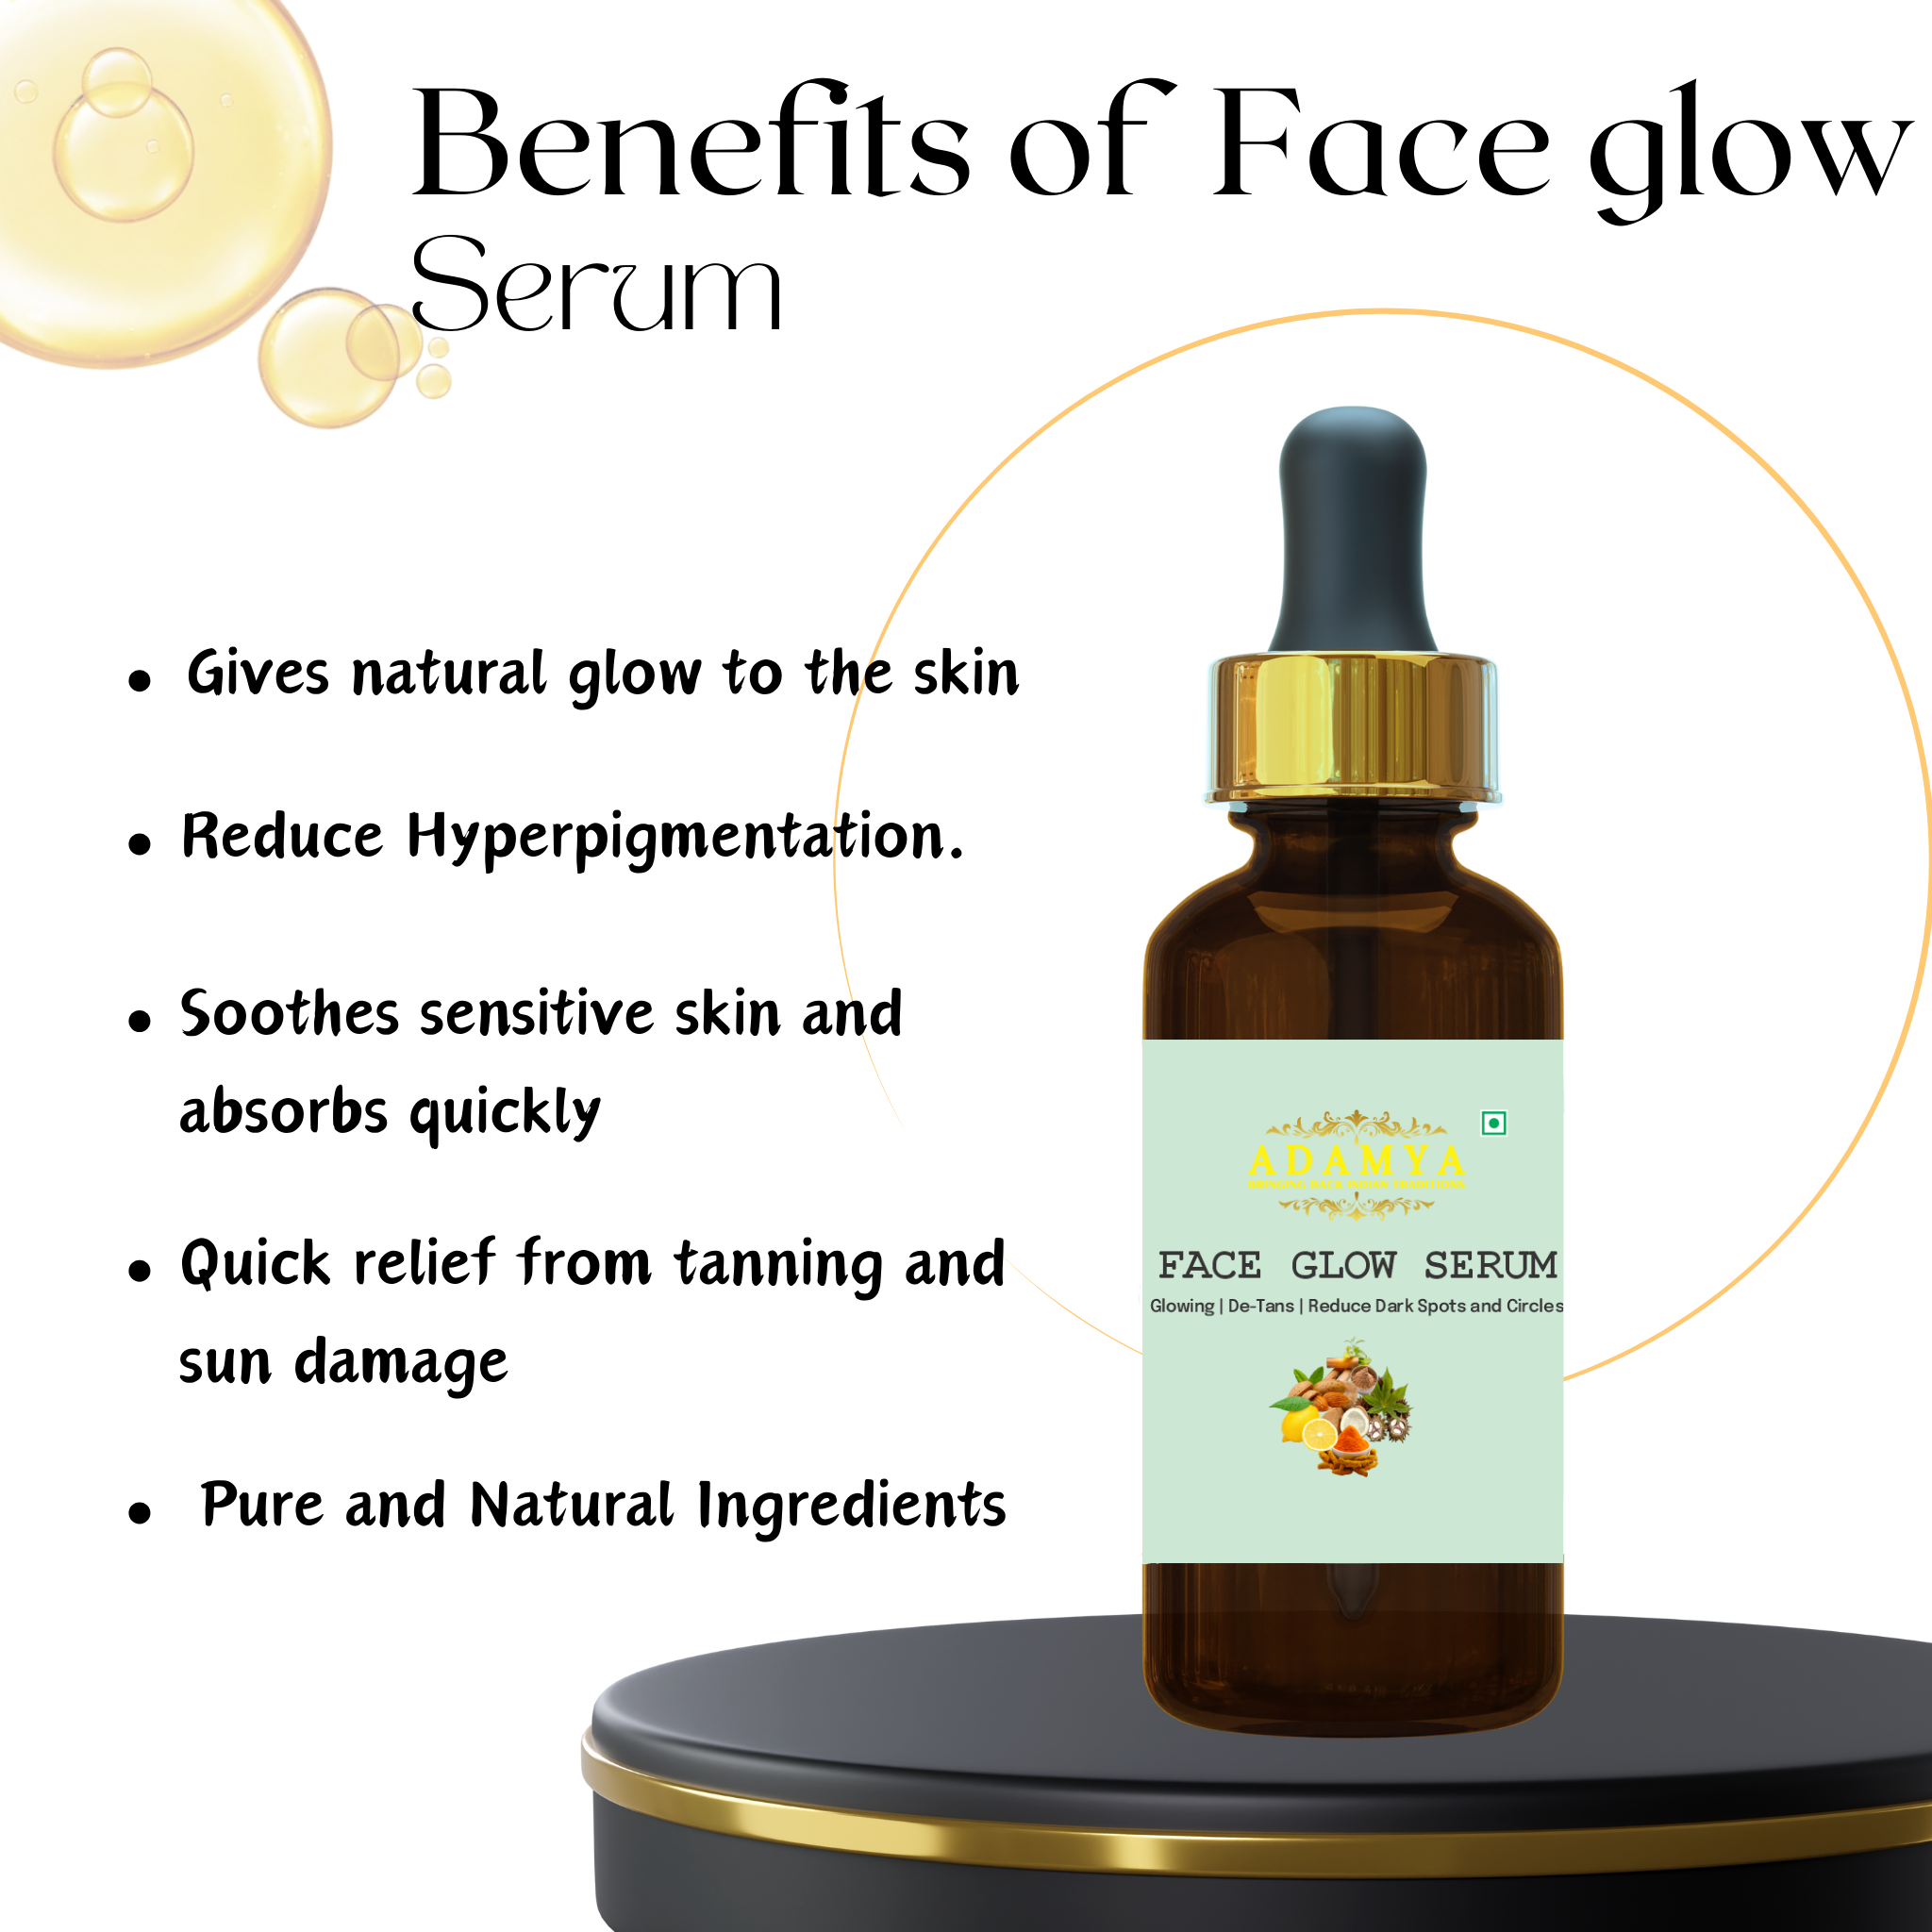 FACE GLOW SERUM FOR GLOWING, DE-TANS AND REDUCE DARK SPOTS AND CIRCLES _ 100% PURE, 100% NATURAL AND CHEMICAL FREE